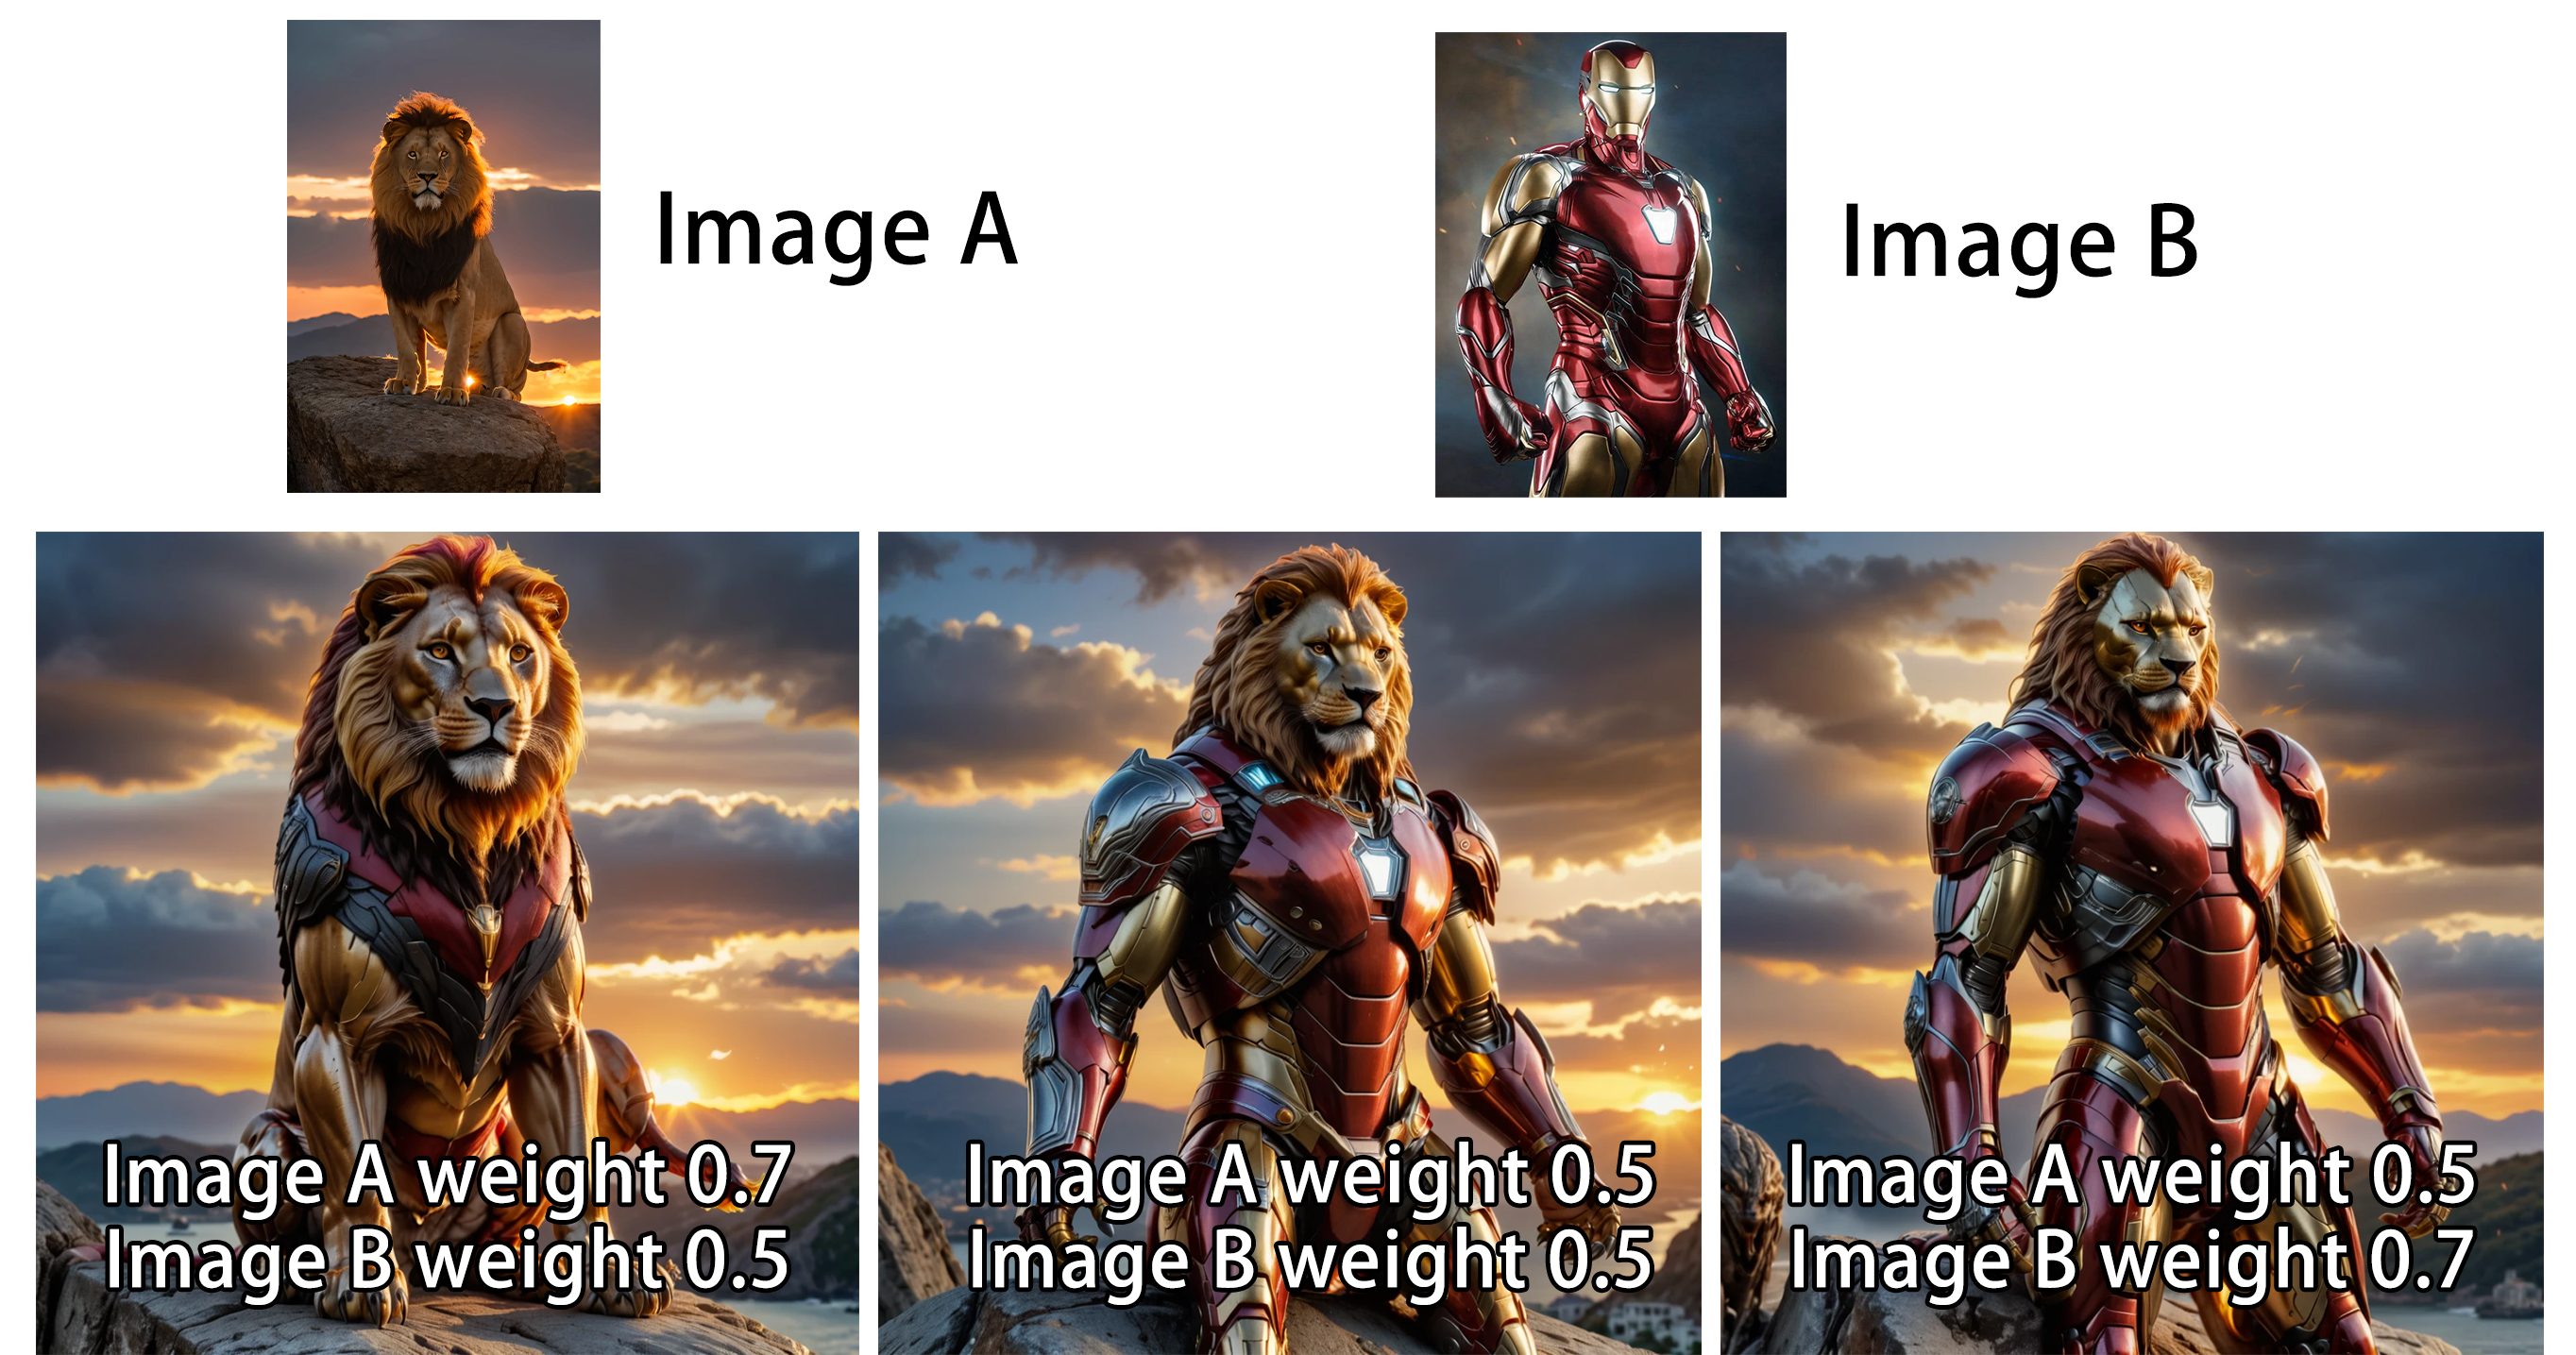 Upload two photos, select the weight for each, and combine them into one interesting new photo